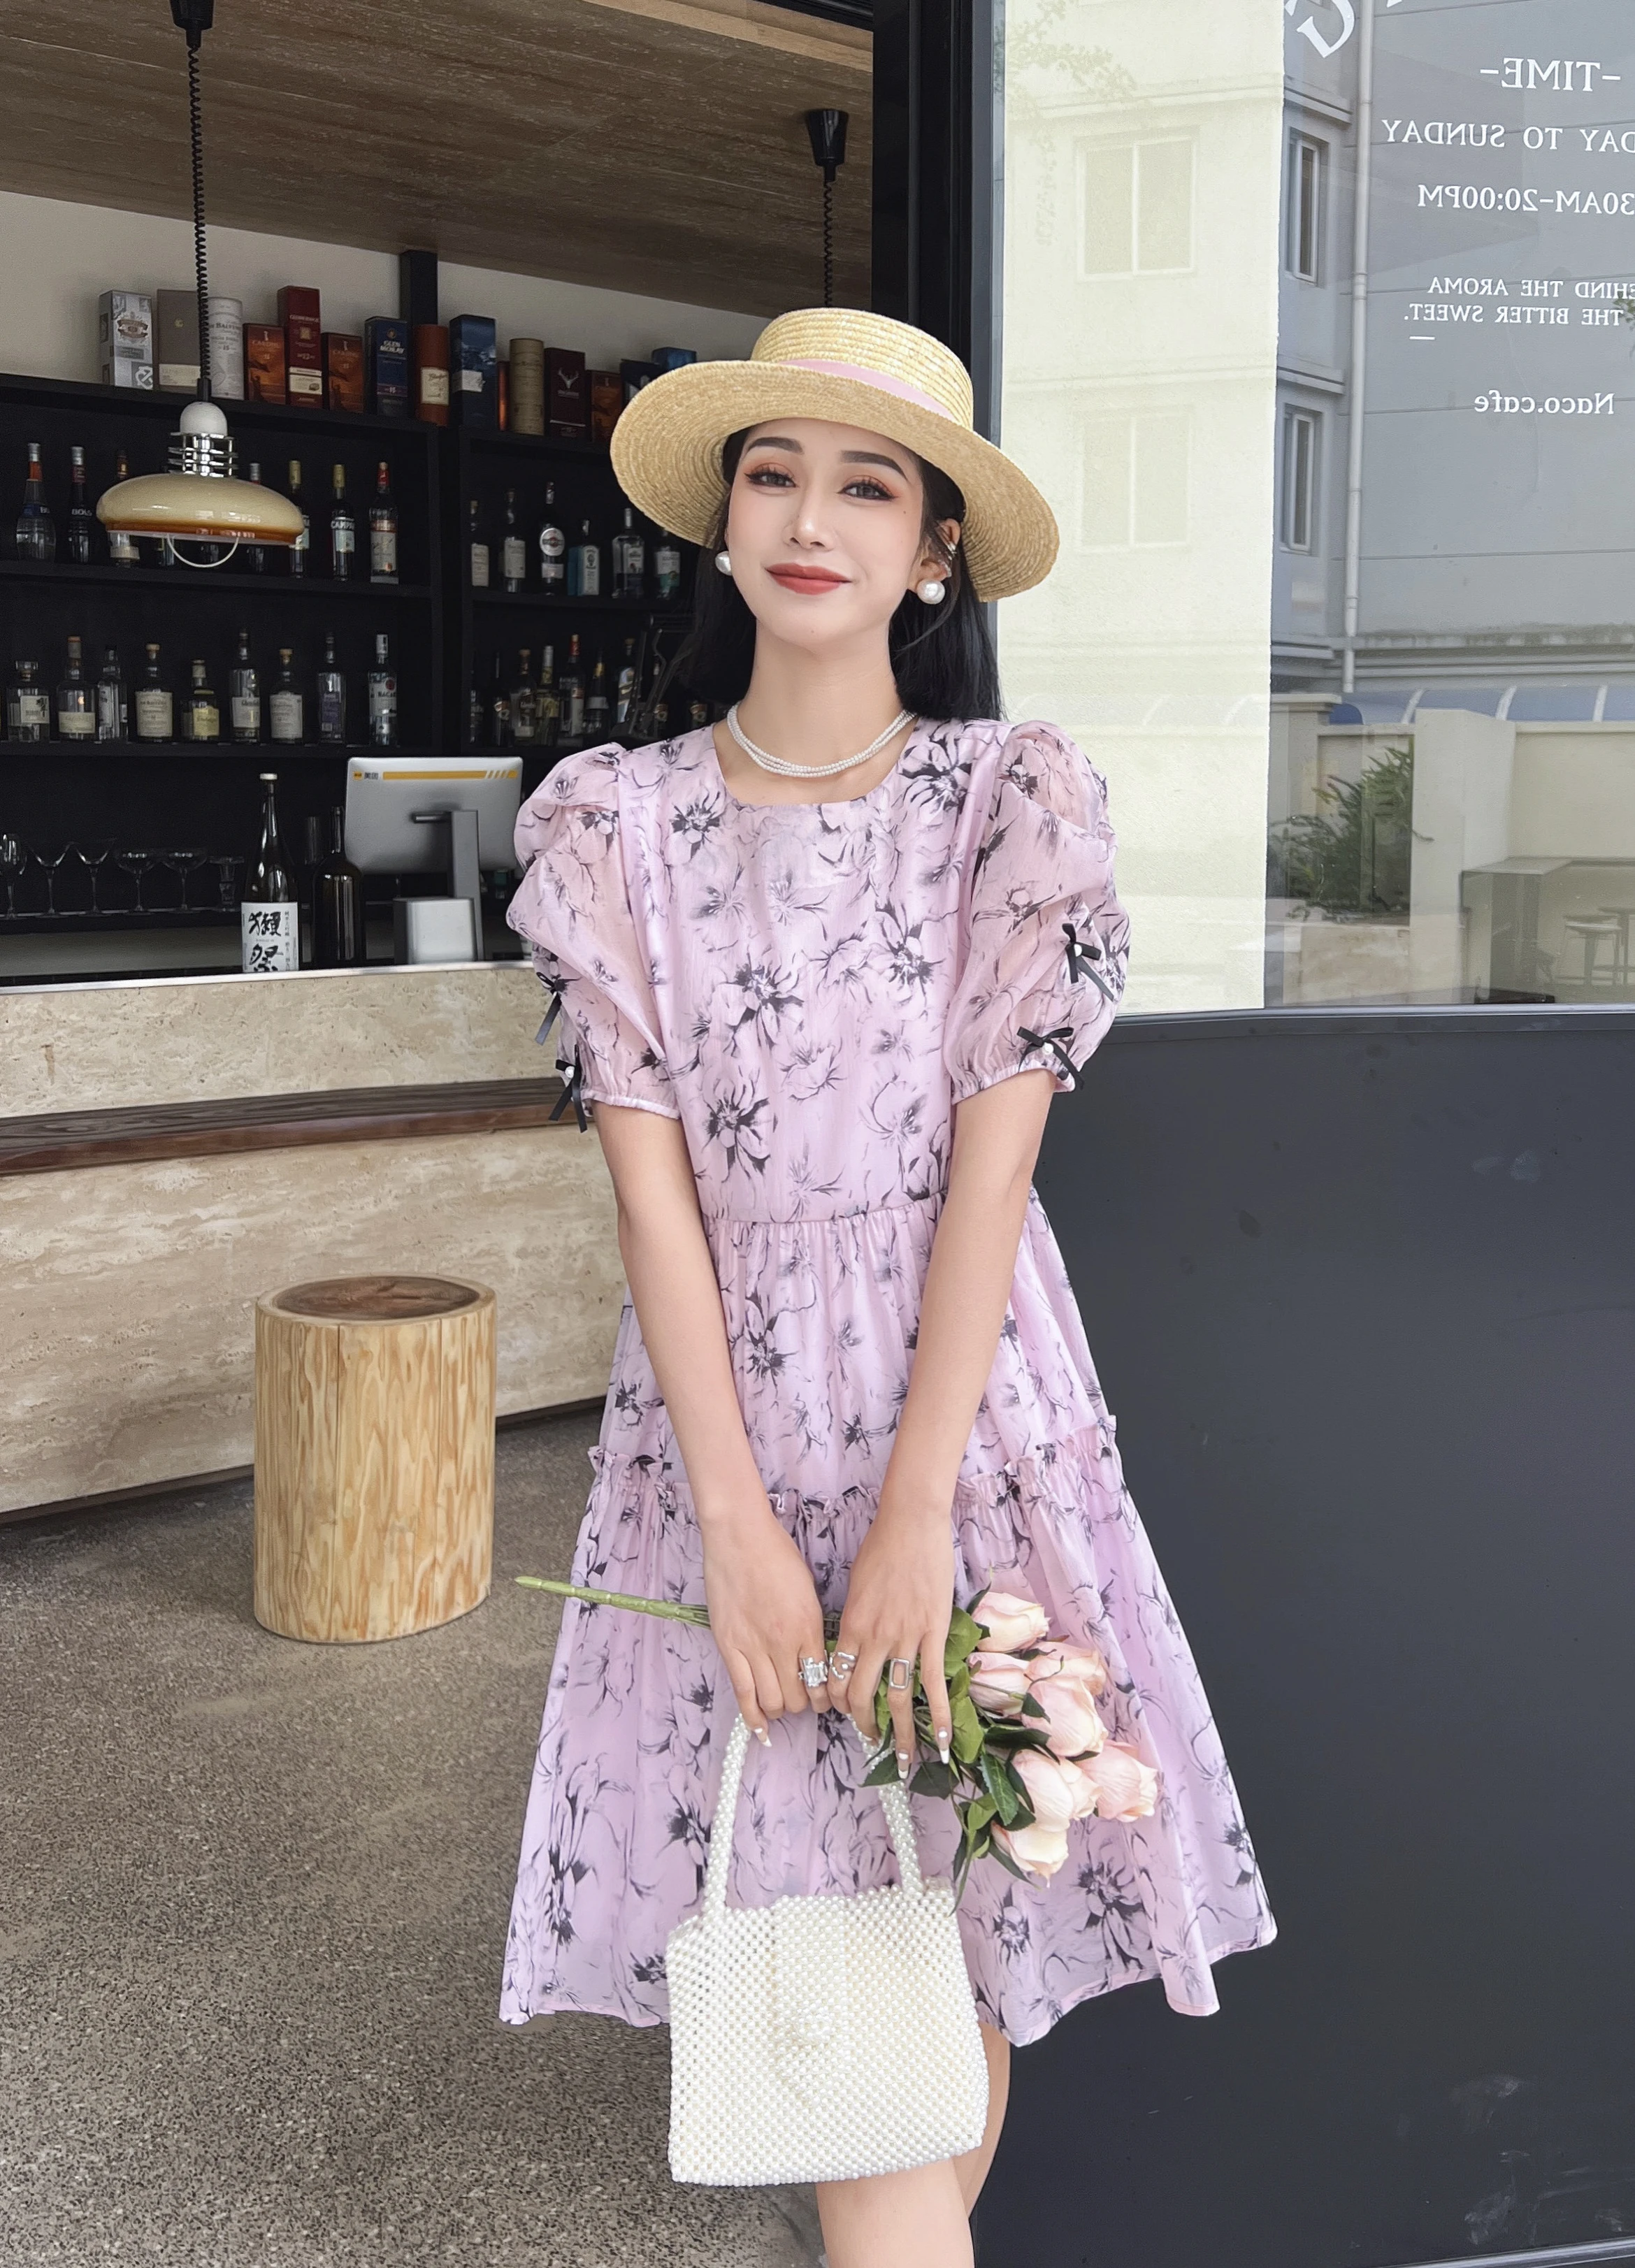 

Summer New Chiffon Dress Elegant Ink Floral Print Short Sleeve Mini Puff A-line Above Knee Skirt Young Style Dresses For Women